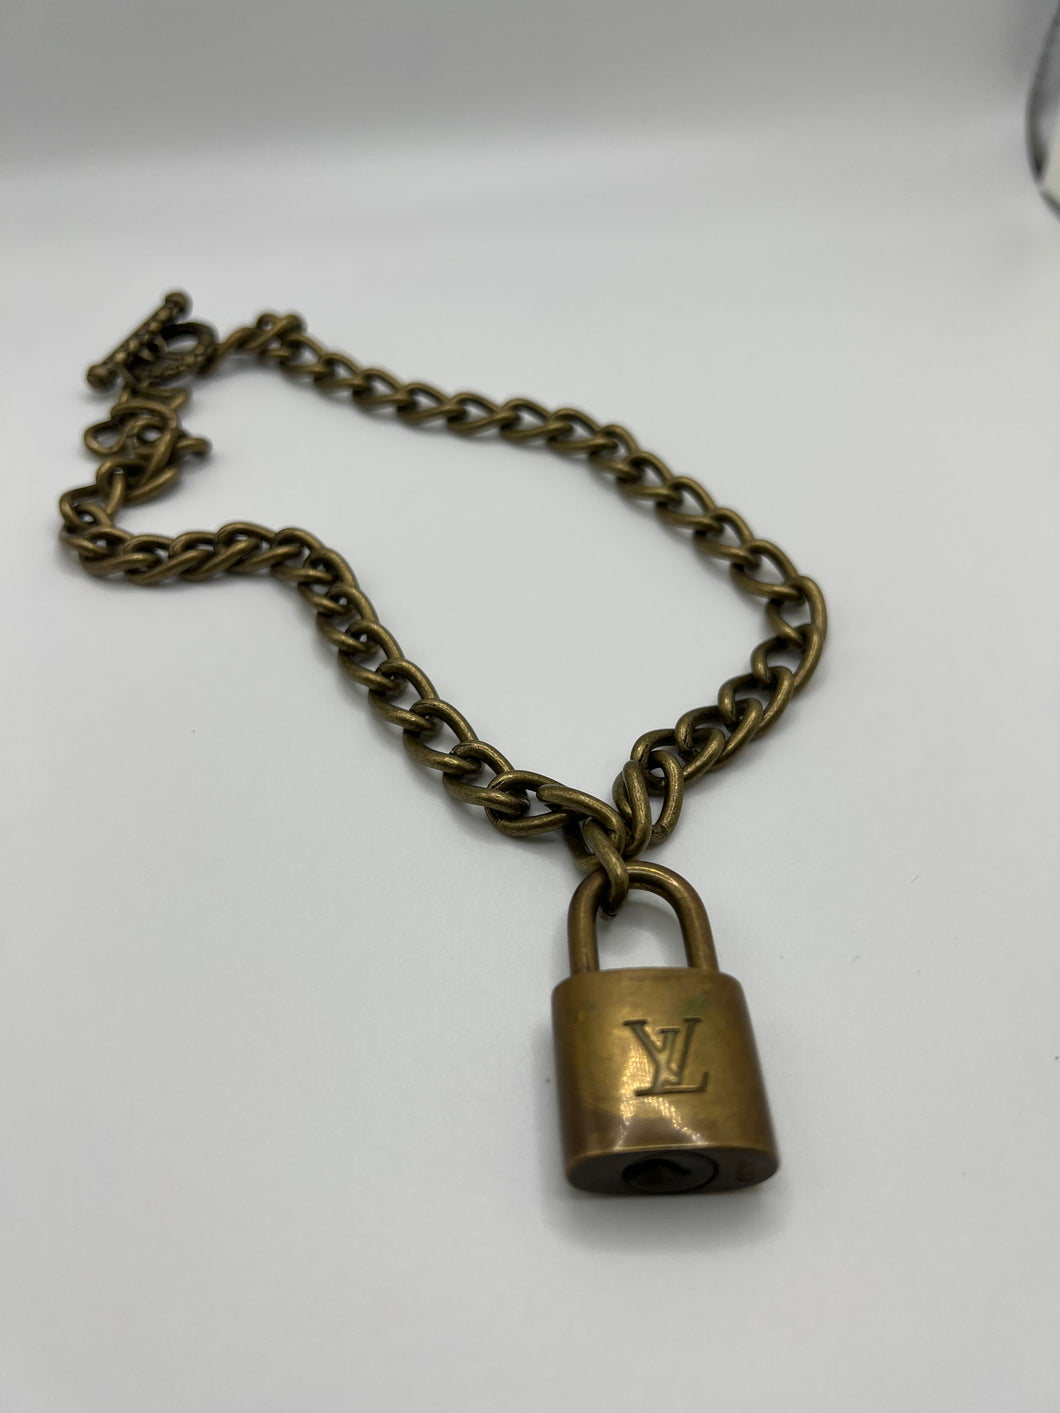 Upcycled Lock Necklace - Antique Gold